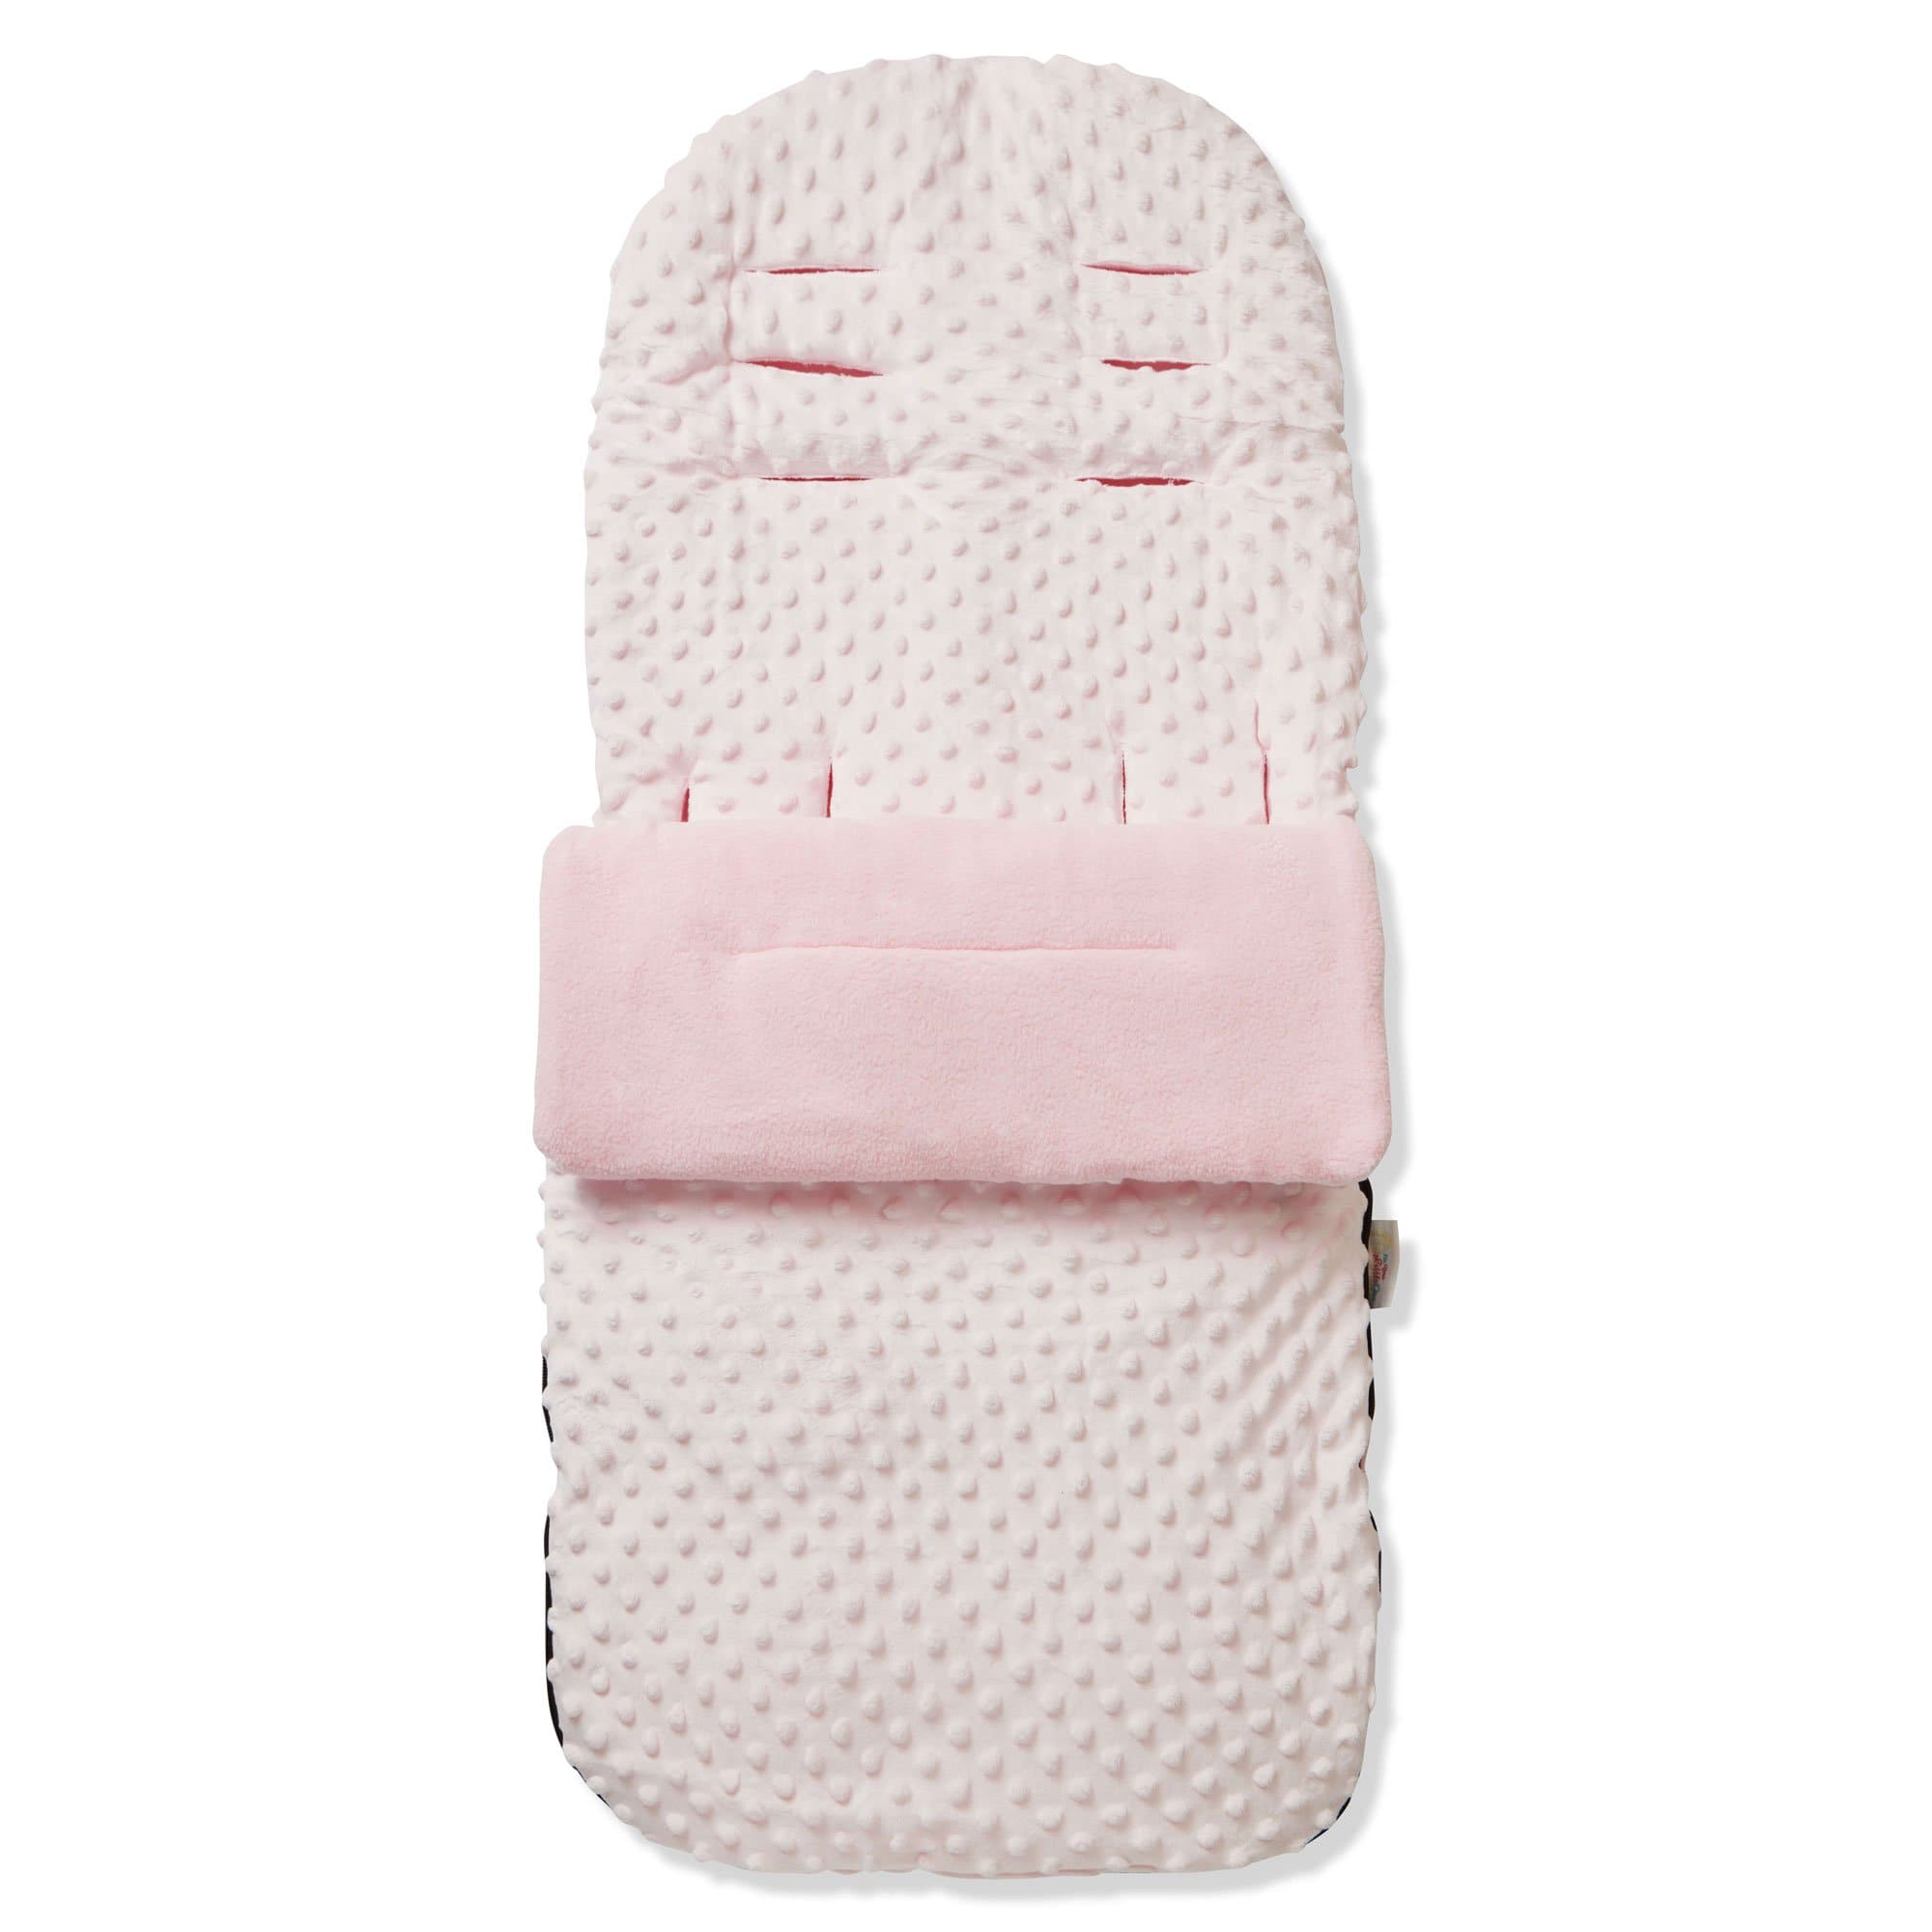 Dimple Footmuff / Cosy Toes Compatible with Red Kite - For Your Little One